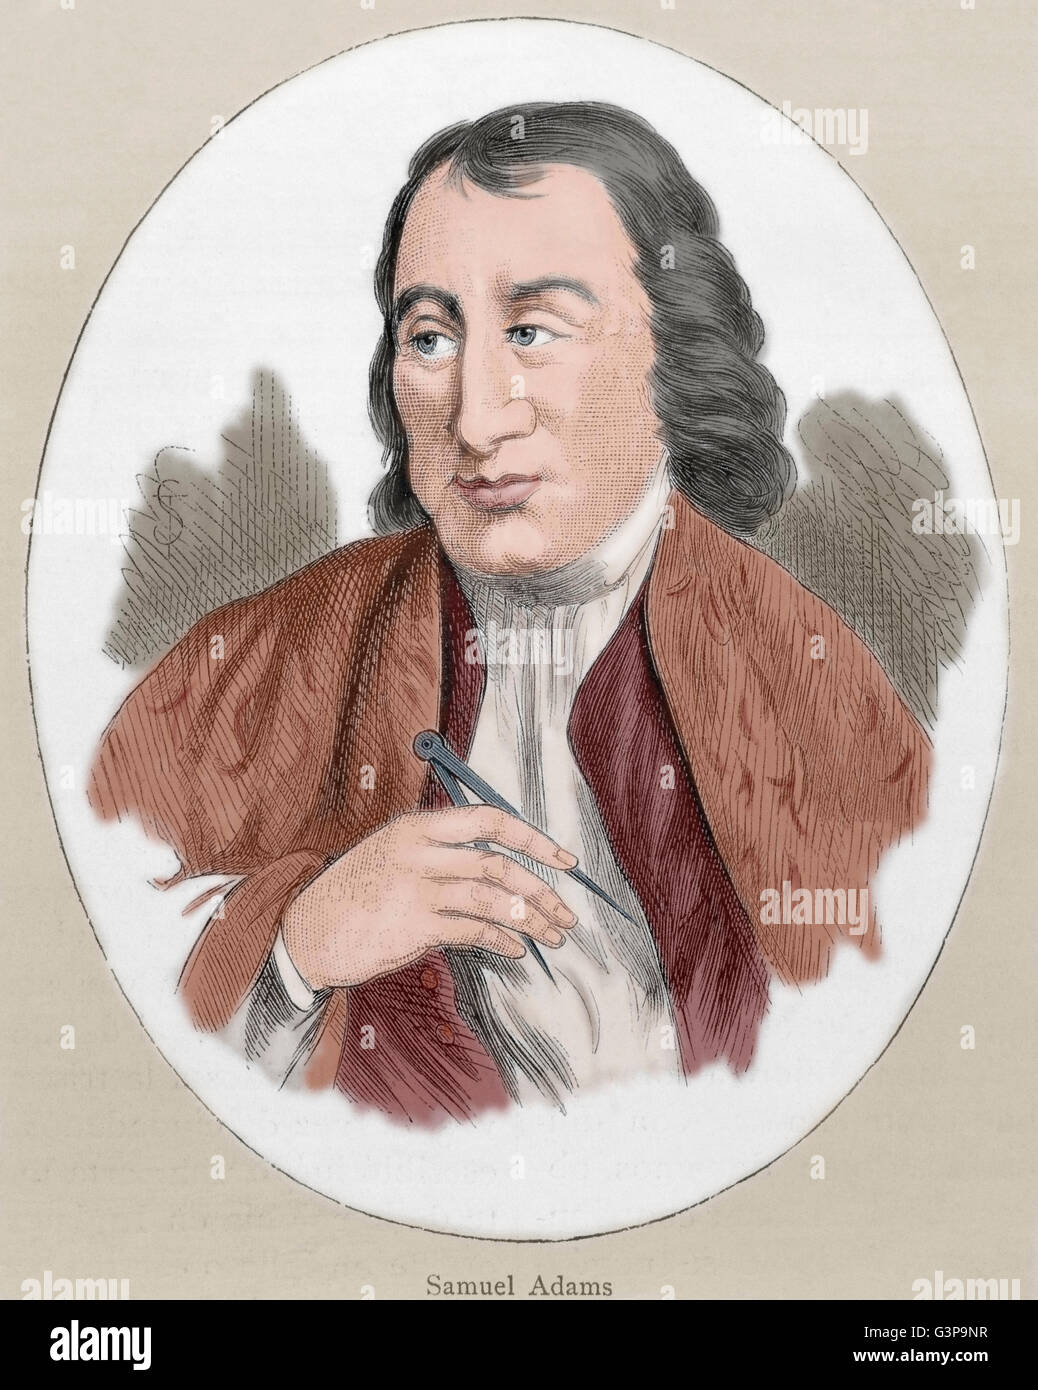 Samuel Adams (1722-1803). American statesman, political philosopher, and one of the Founding Fathers of the United States. Portrait. Engraving. Colored. Stock Photo